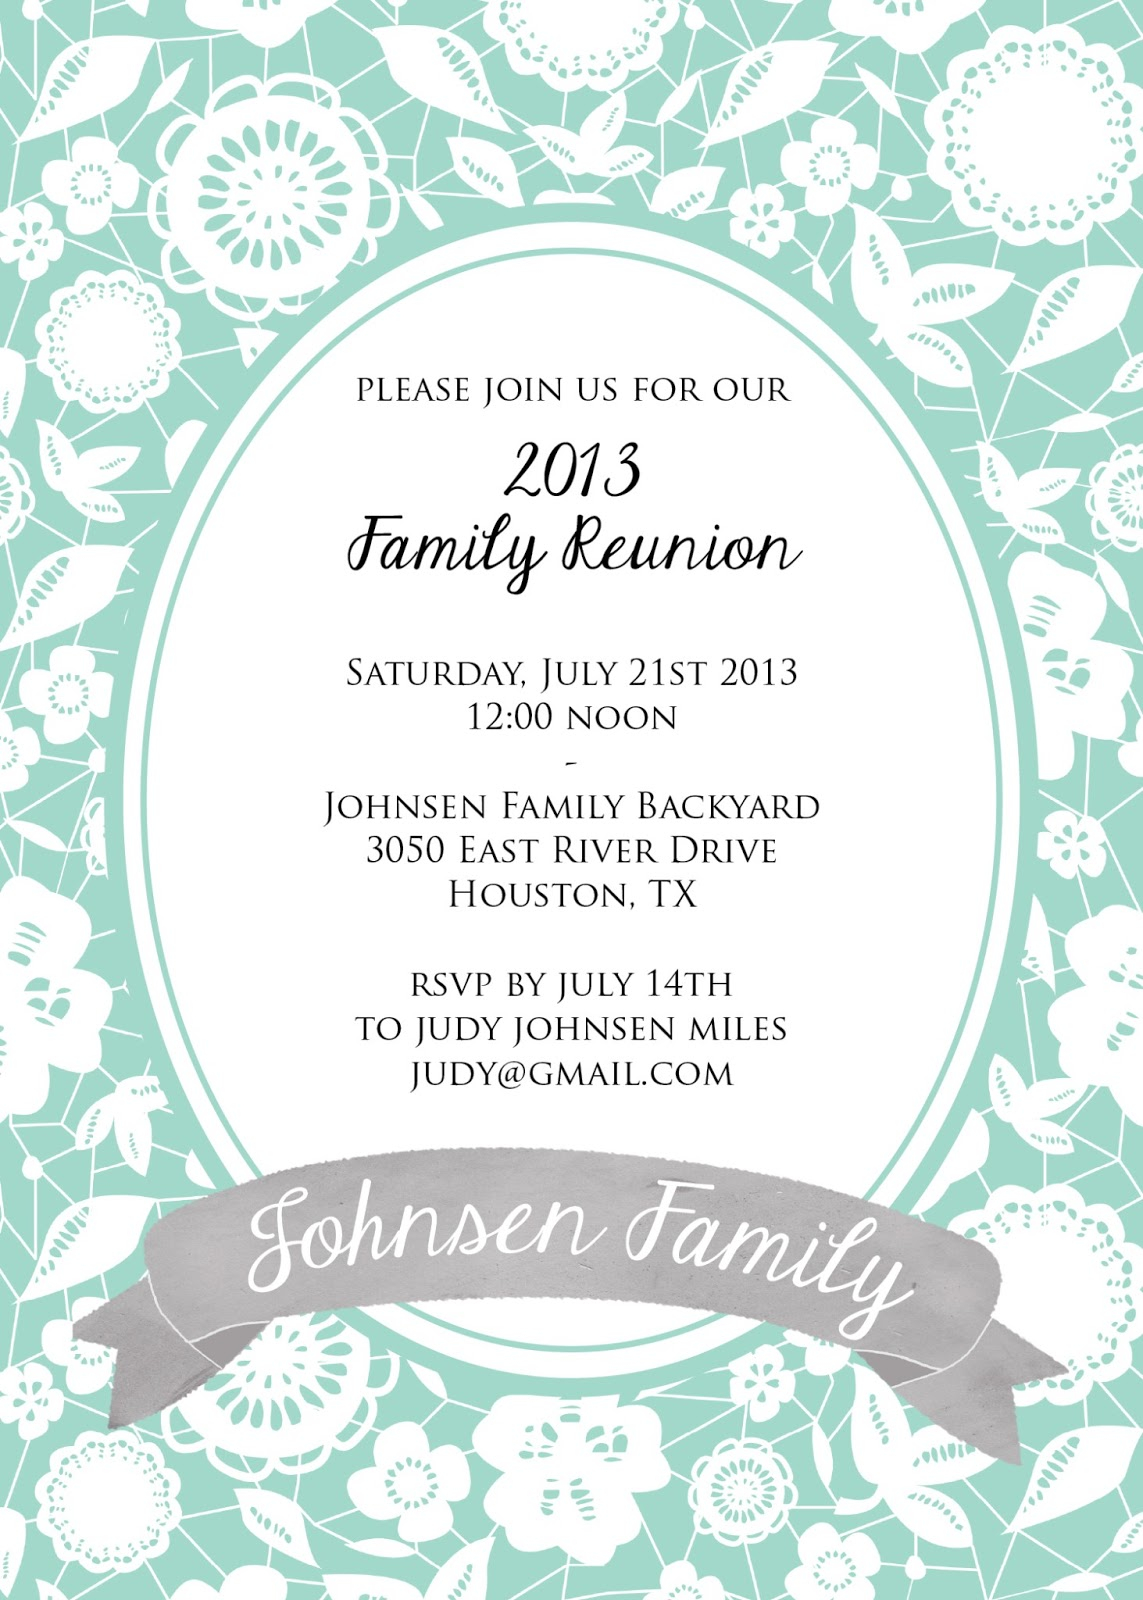 Free Family Reunion Invitation Card With Floral Pattern And pertaining to size 1143 X 1600